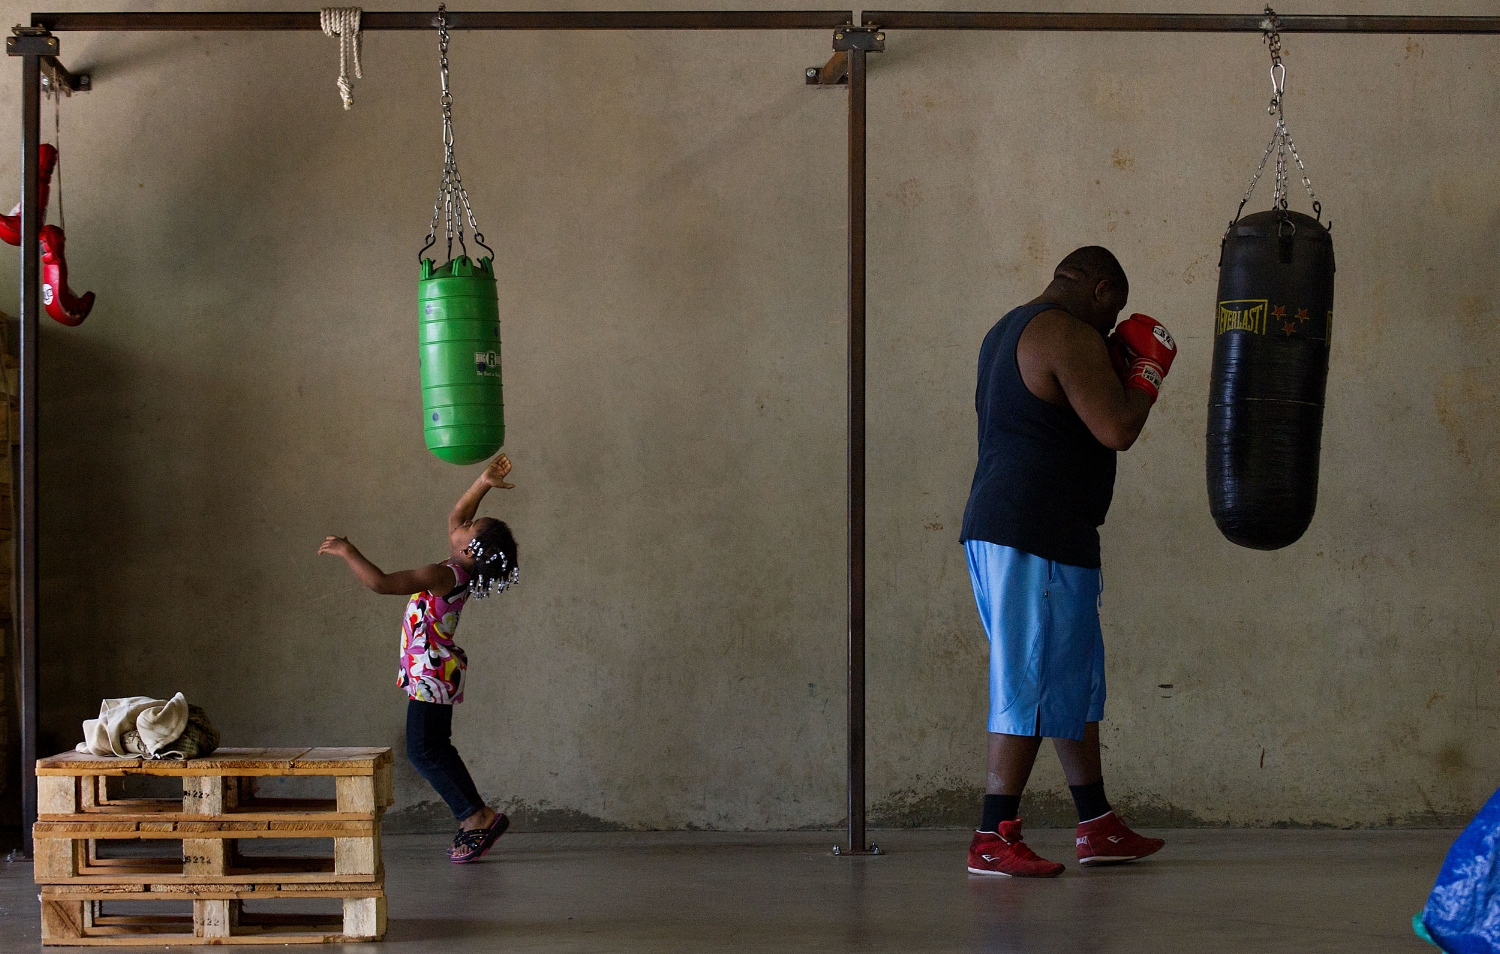  Ja'Niya Haley 3, left, mimics her father Cassius Haley as he works out at Main Event Mateen Boxing Club in Sacramento on Thursday, June 16, 2011. 